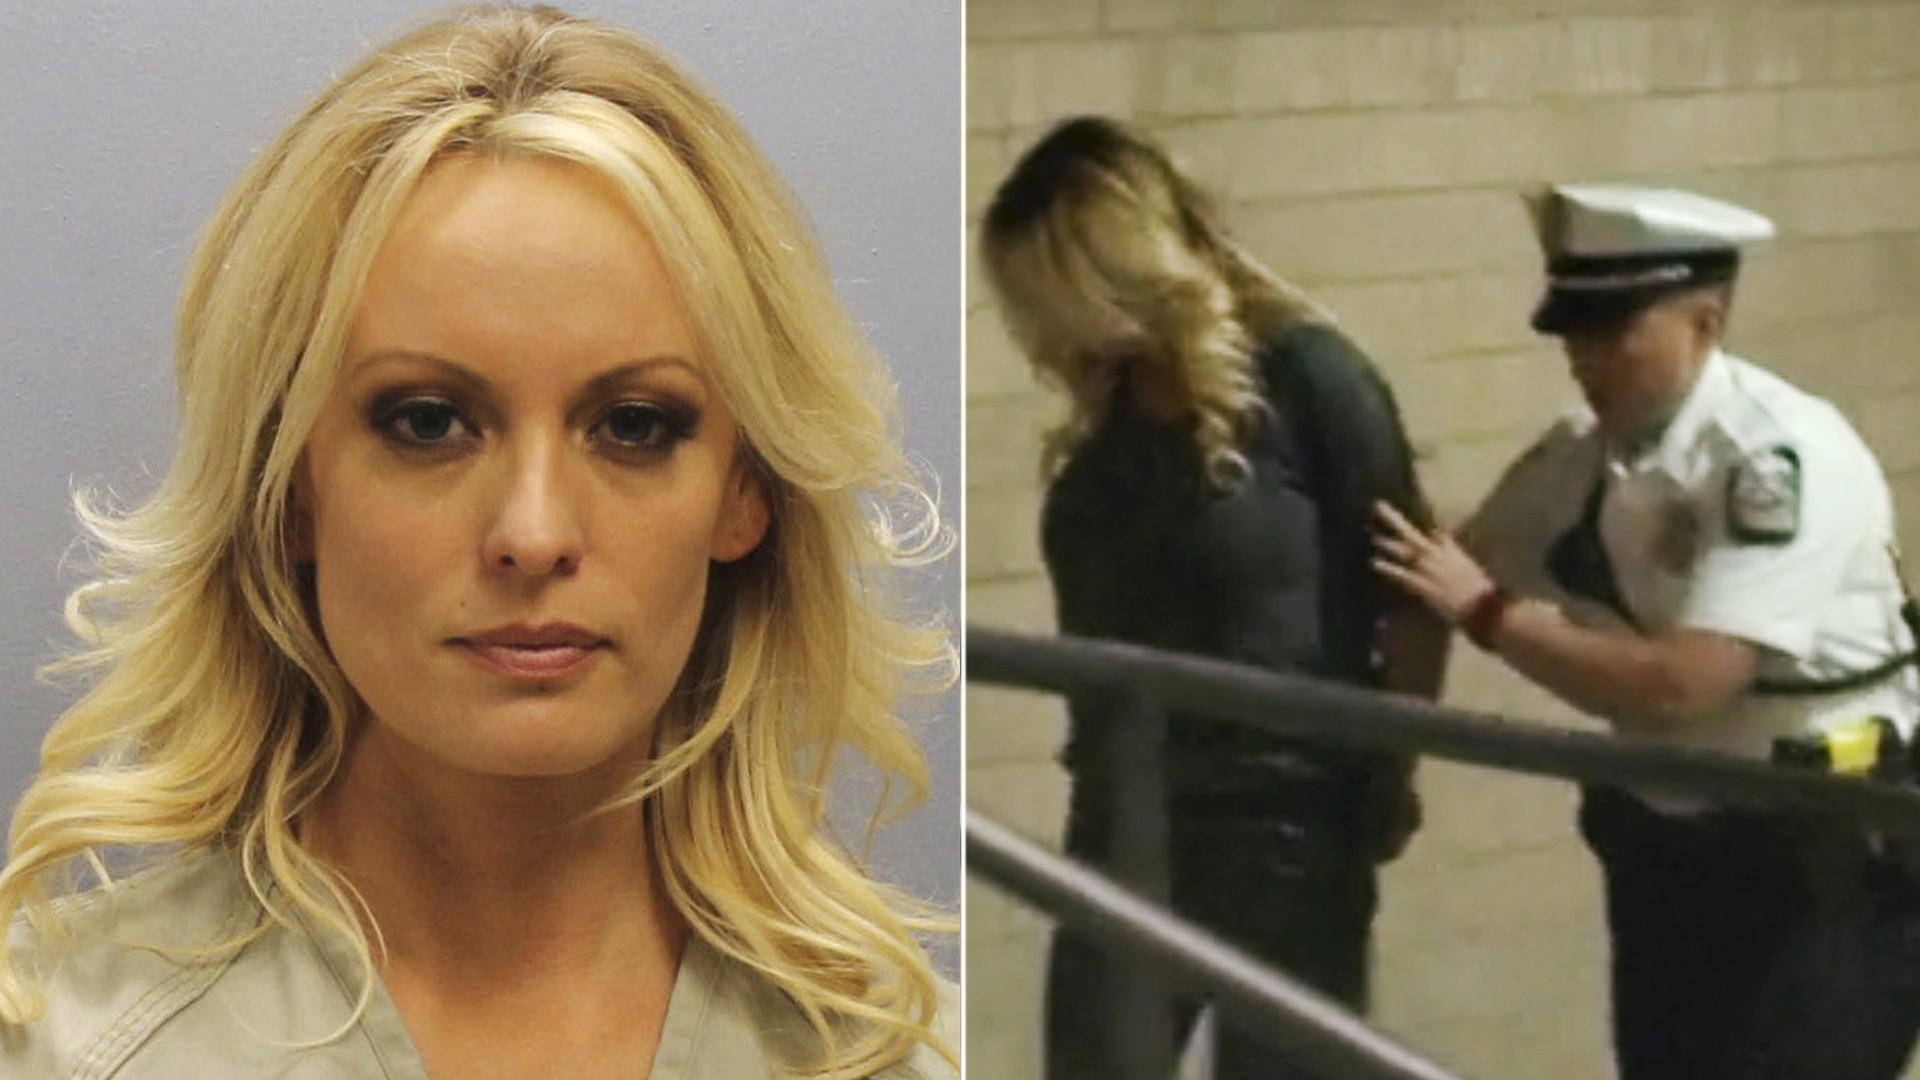 ct-stormy-daniels-arrested-ohio-20180712